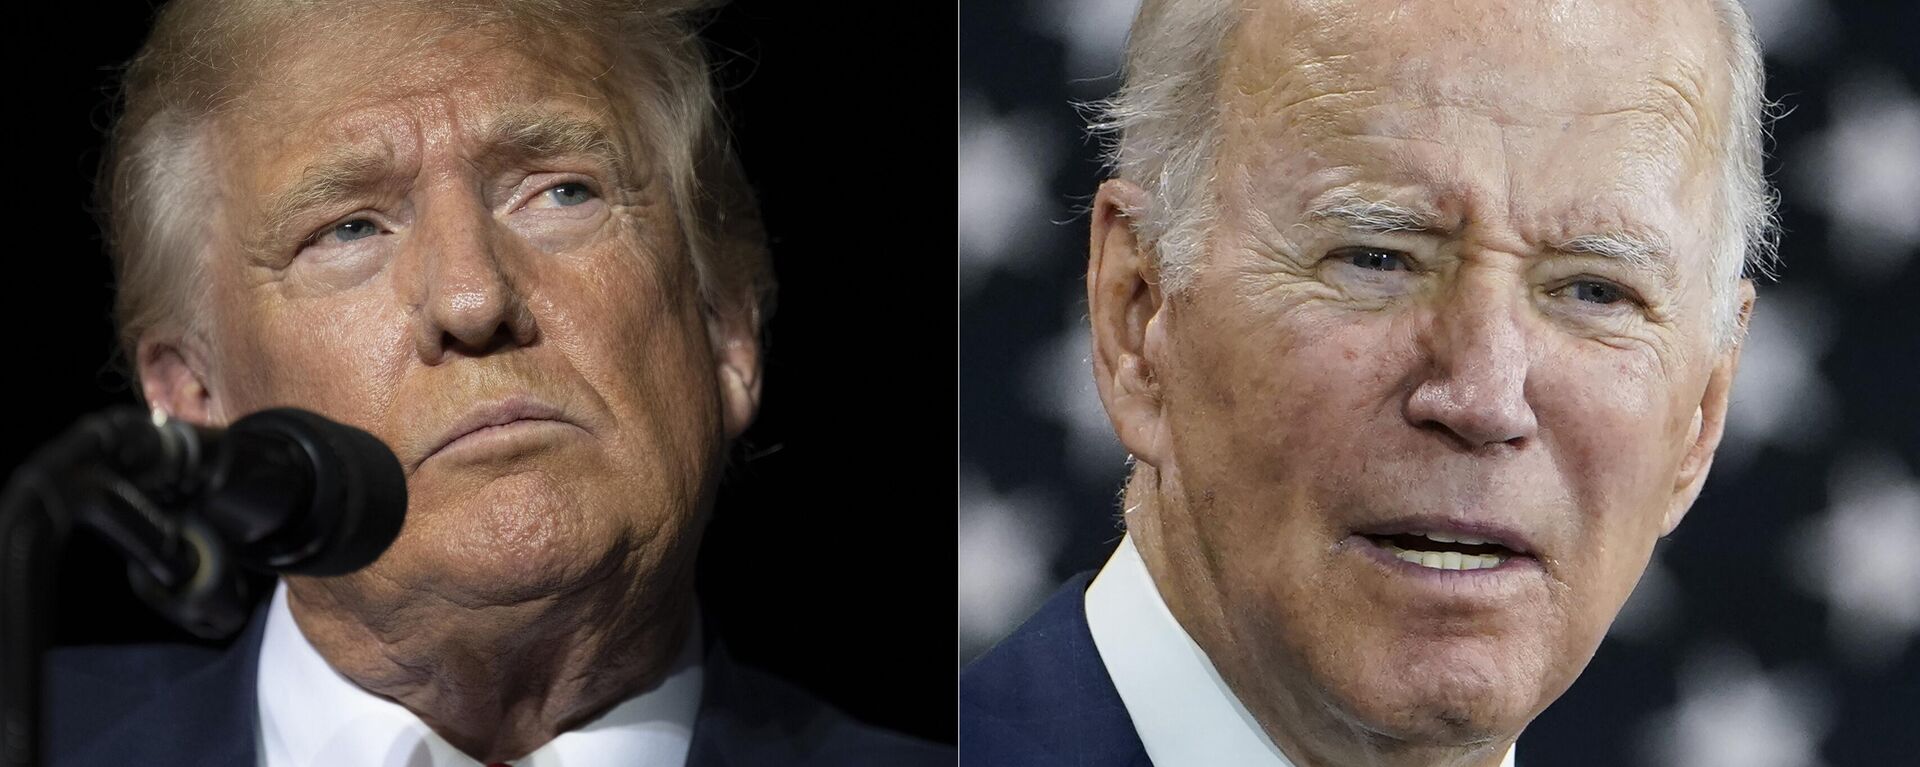 This combination of photos shows former President Donald Trump, left, and President Joe Biden, right. Biden and Trump are preparing for a possible rematch in 2024. But a new poll finds a notable lack of enthusiasm within the parties for either man as his party's leader, and a clear opening for new leadership. The poll from The Associated Press-NORC Center for Public Affairs Research finds a third of both Democrats and Republicans are unsure of who they want leading their party.  - Sputnik International, 1920, 23.05.2023